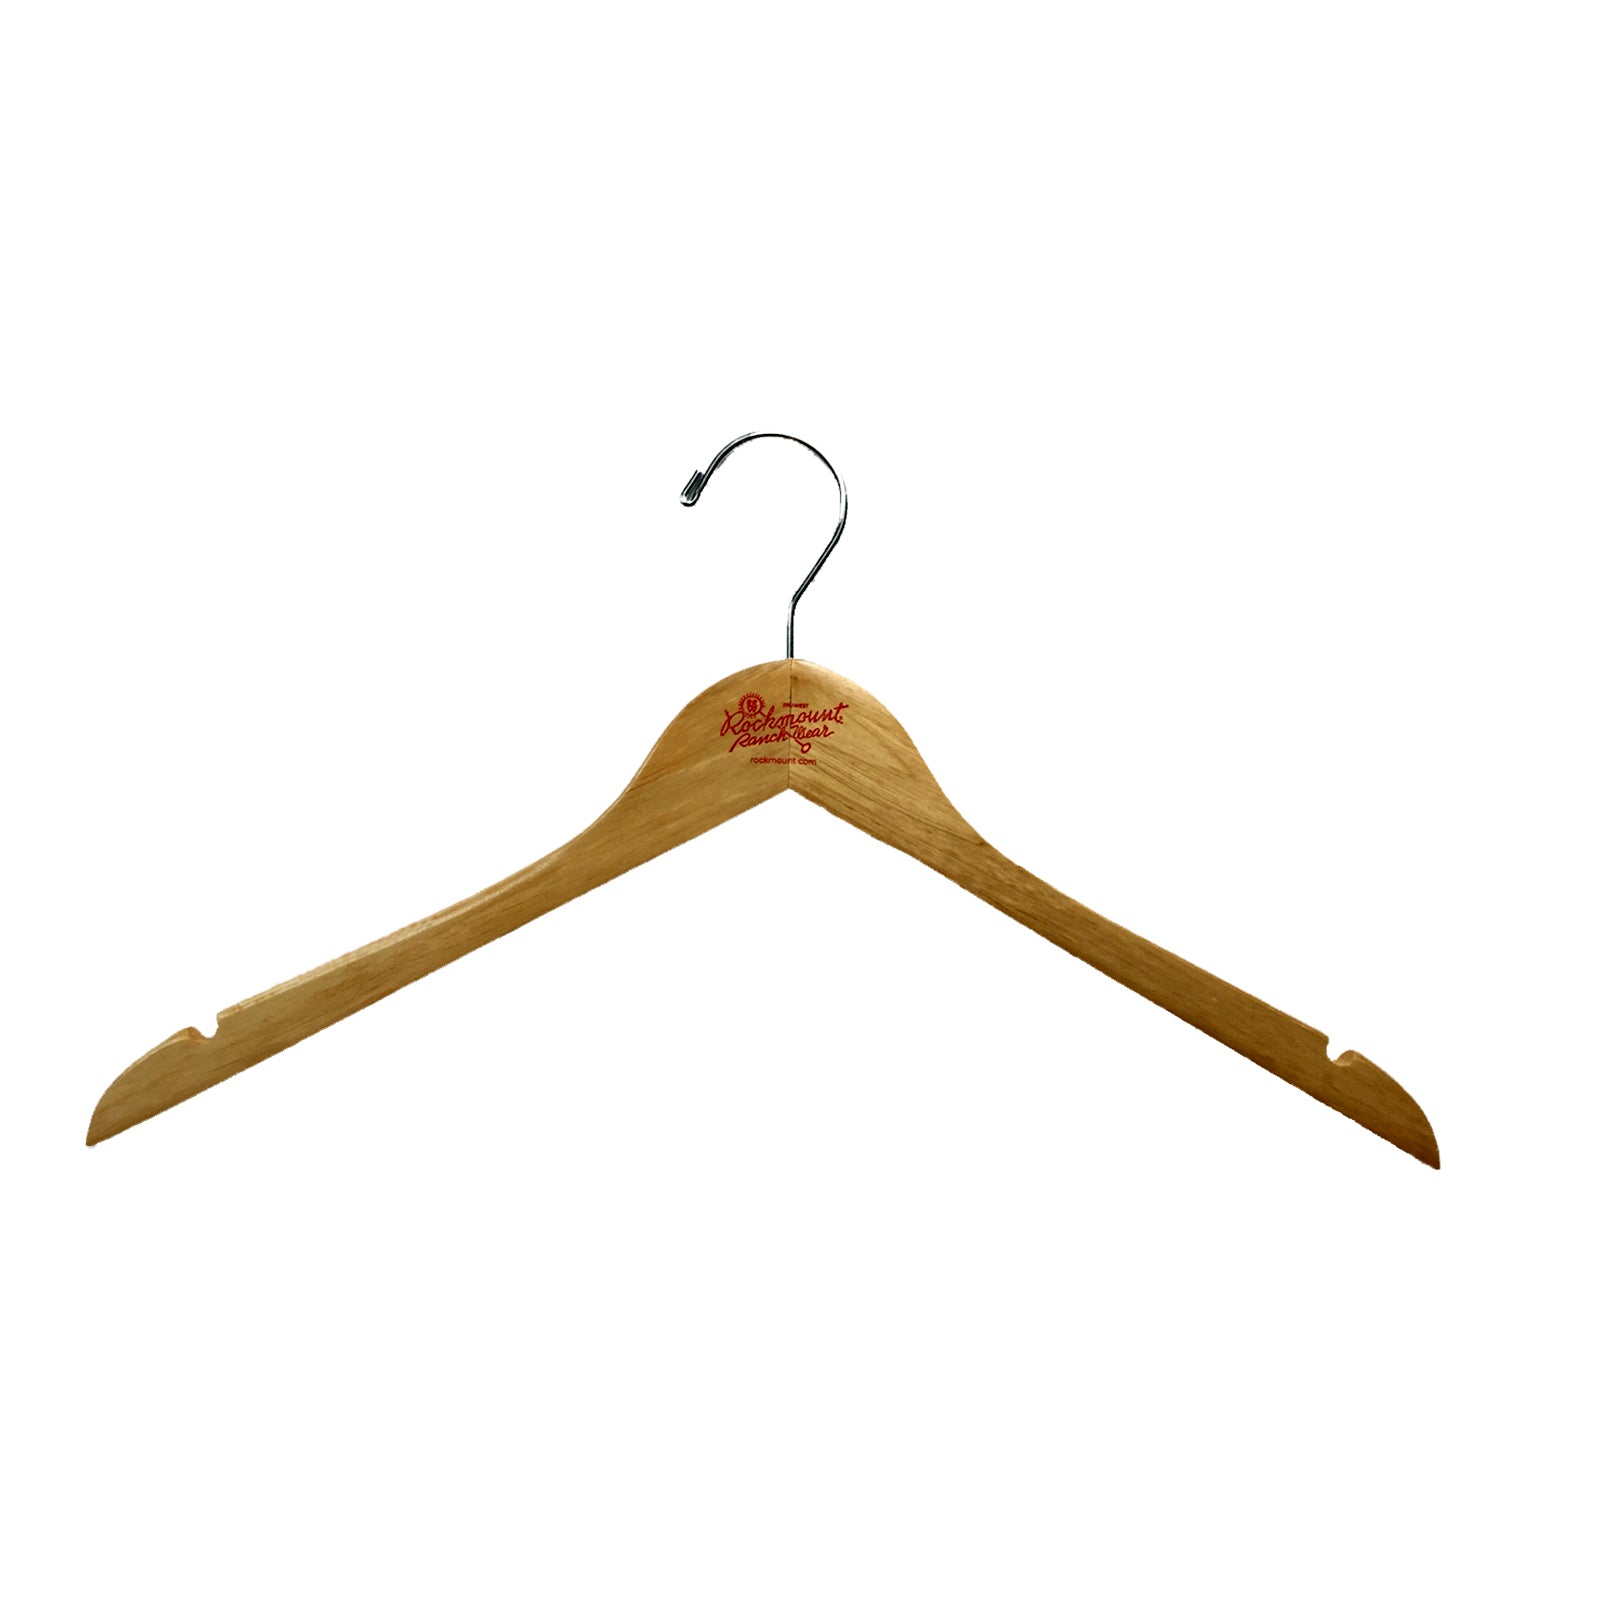 CONNECTWIDE® Wooden Suit Hangers/Wooden Men Clothes Hangers, Wood Clothes  Hangers with Chrome Hooks, Size;(14.5 * 42 * 5 cm) Pack of 3 : Amazon.in:  Home & Kitchen